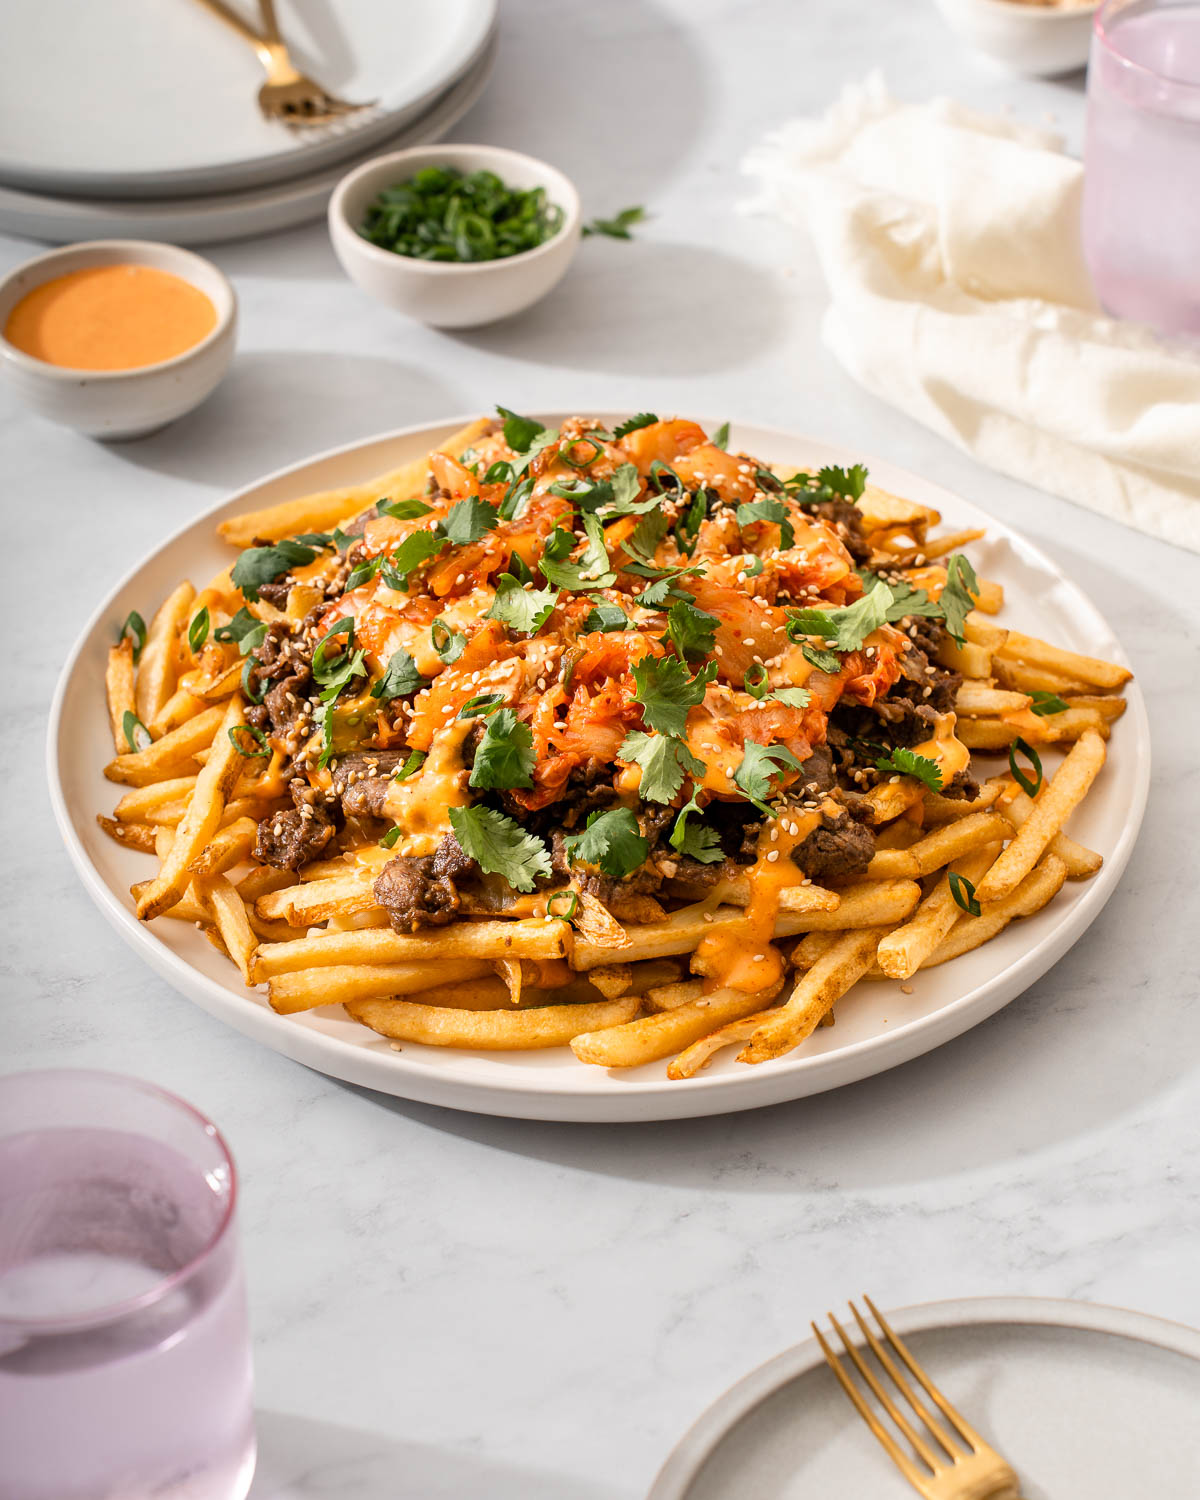 A plate of bulgogi fries in the middle of a table spread.